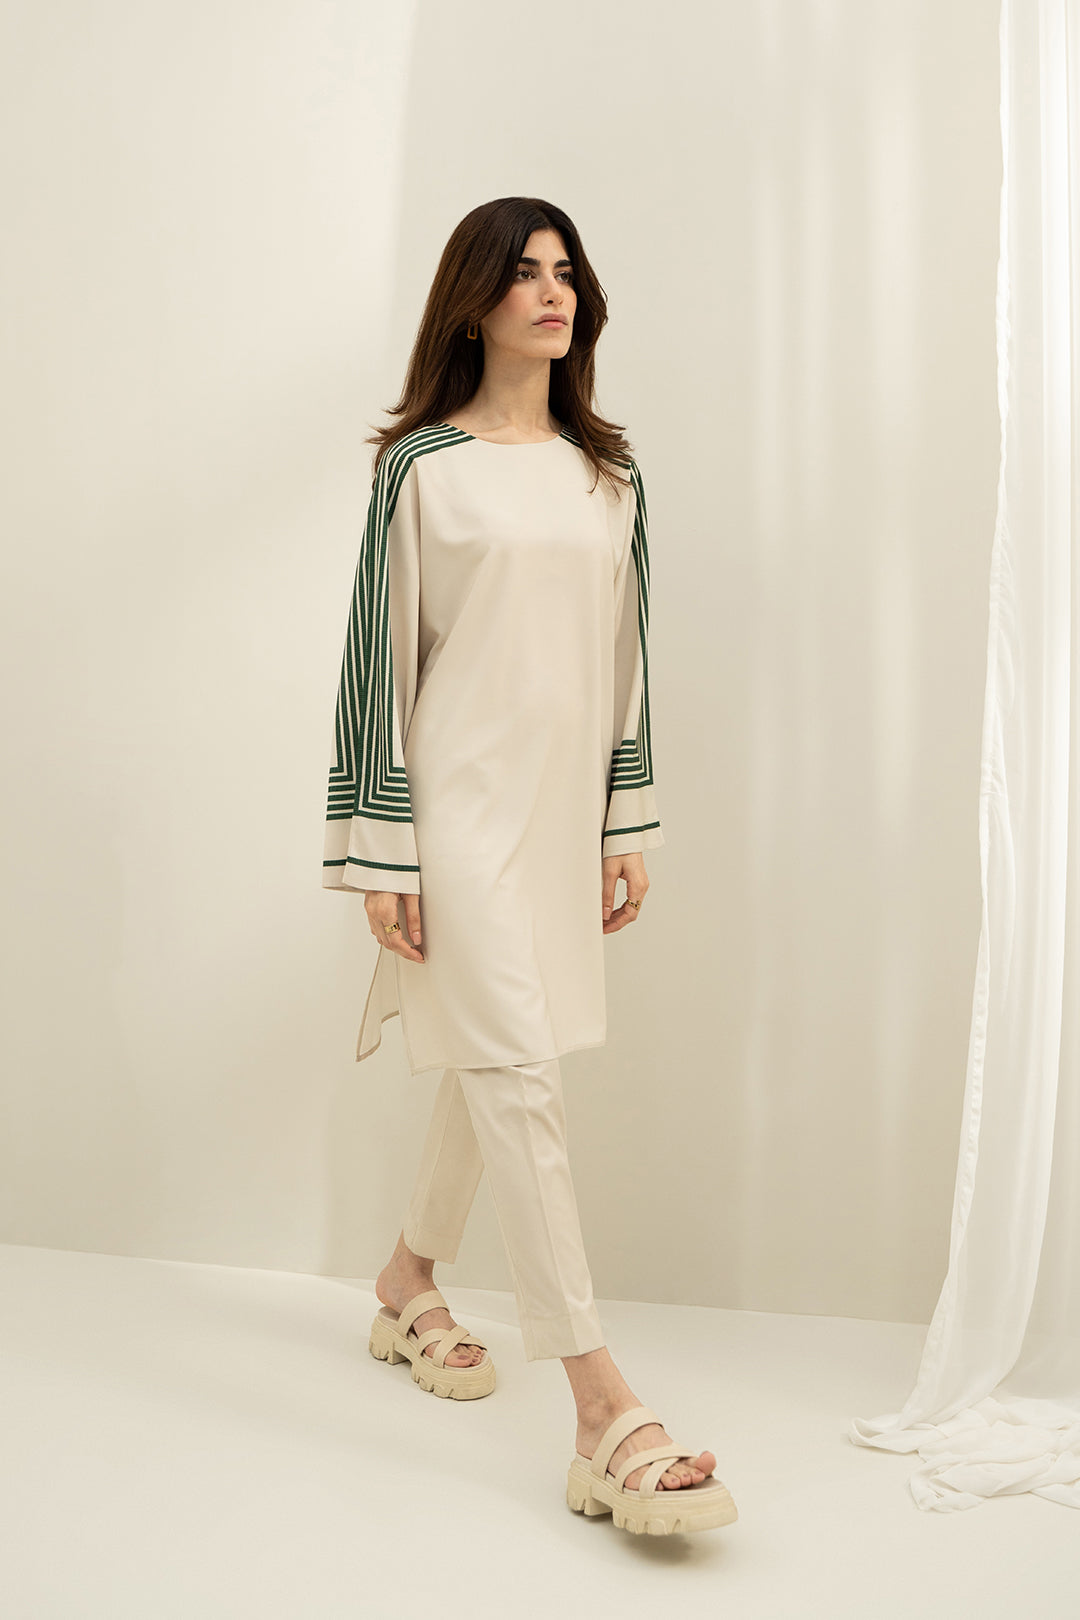 Ivory and Green Tunic